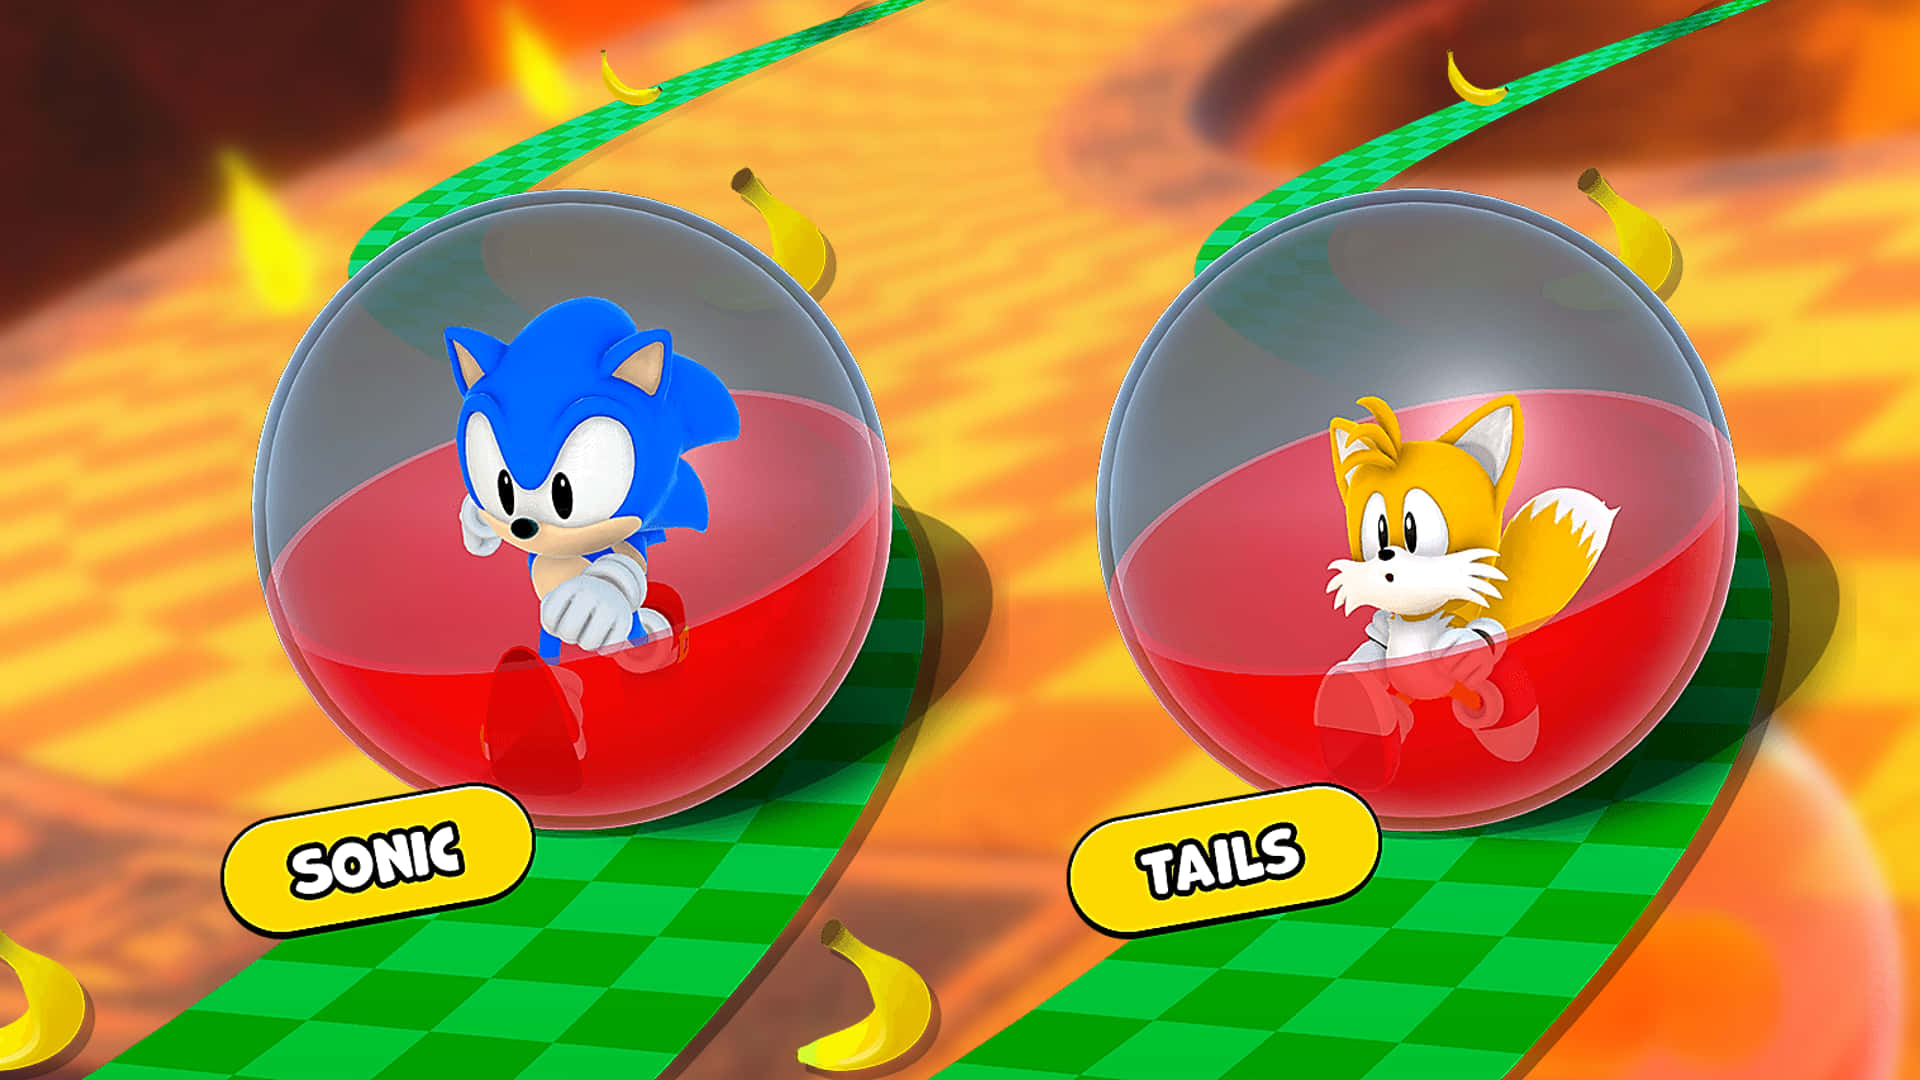 Sonic and Tails Team Up in High-Resolution Wallpaper Wallpaper